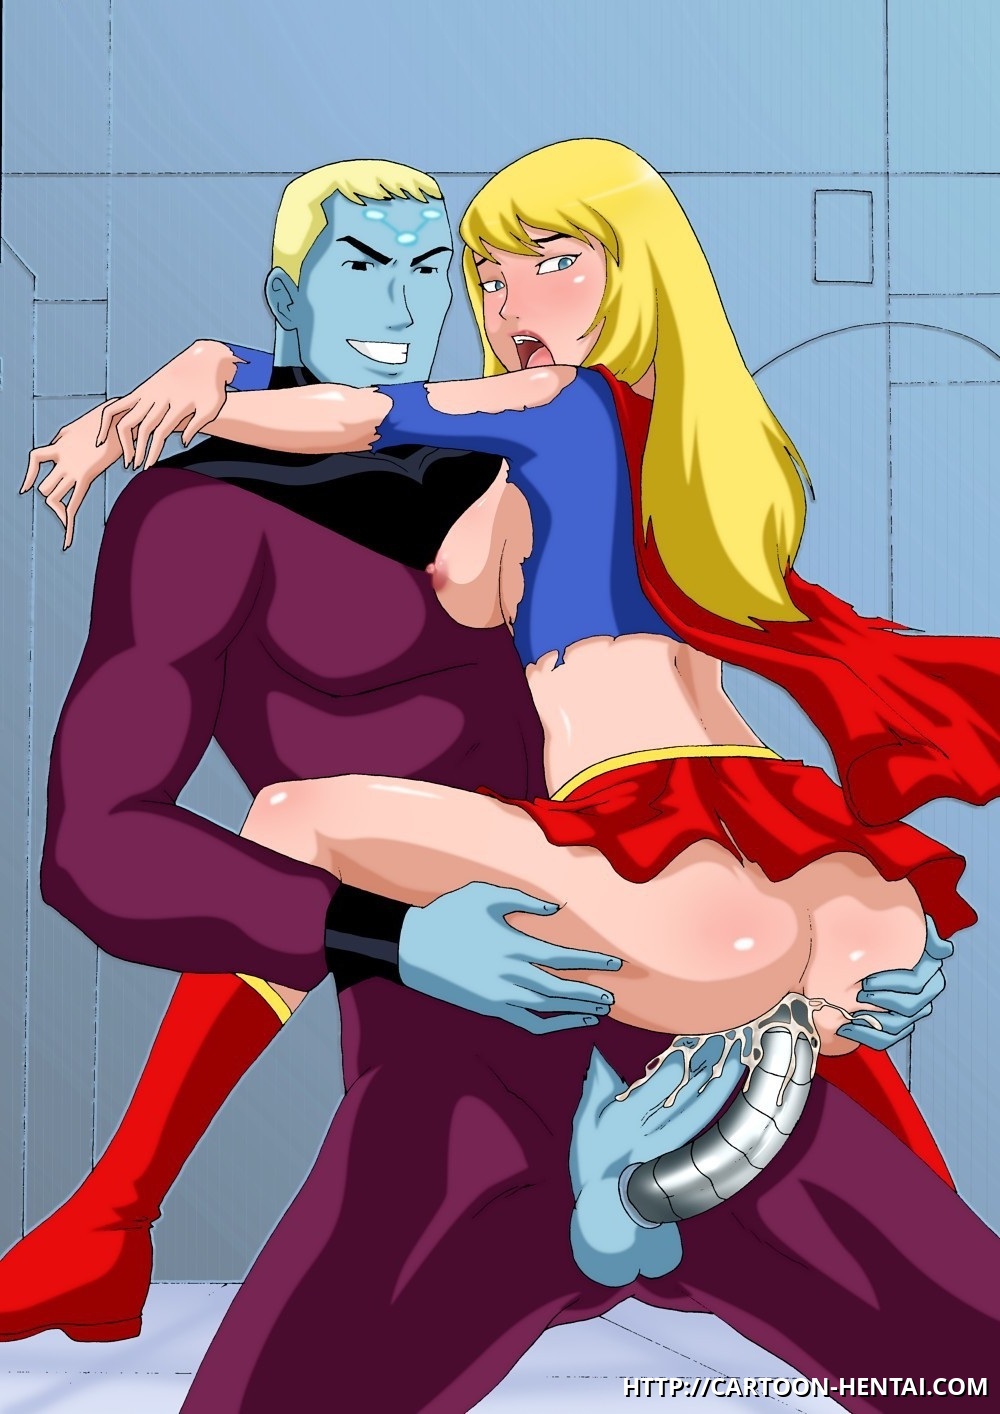 Supergirl Anal - Supergirl loves to fuck bad aliens because she loves unexpected anal sex!